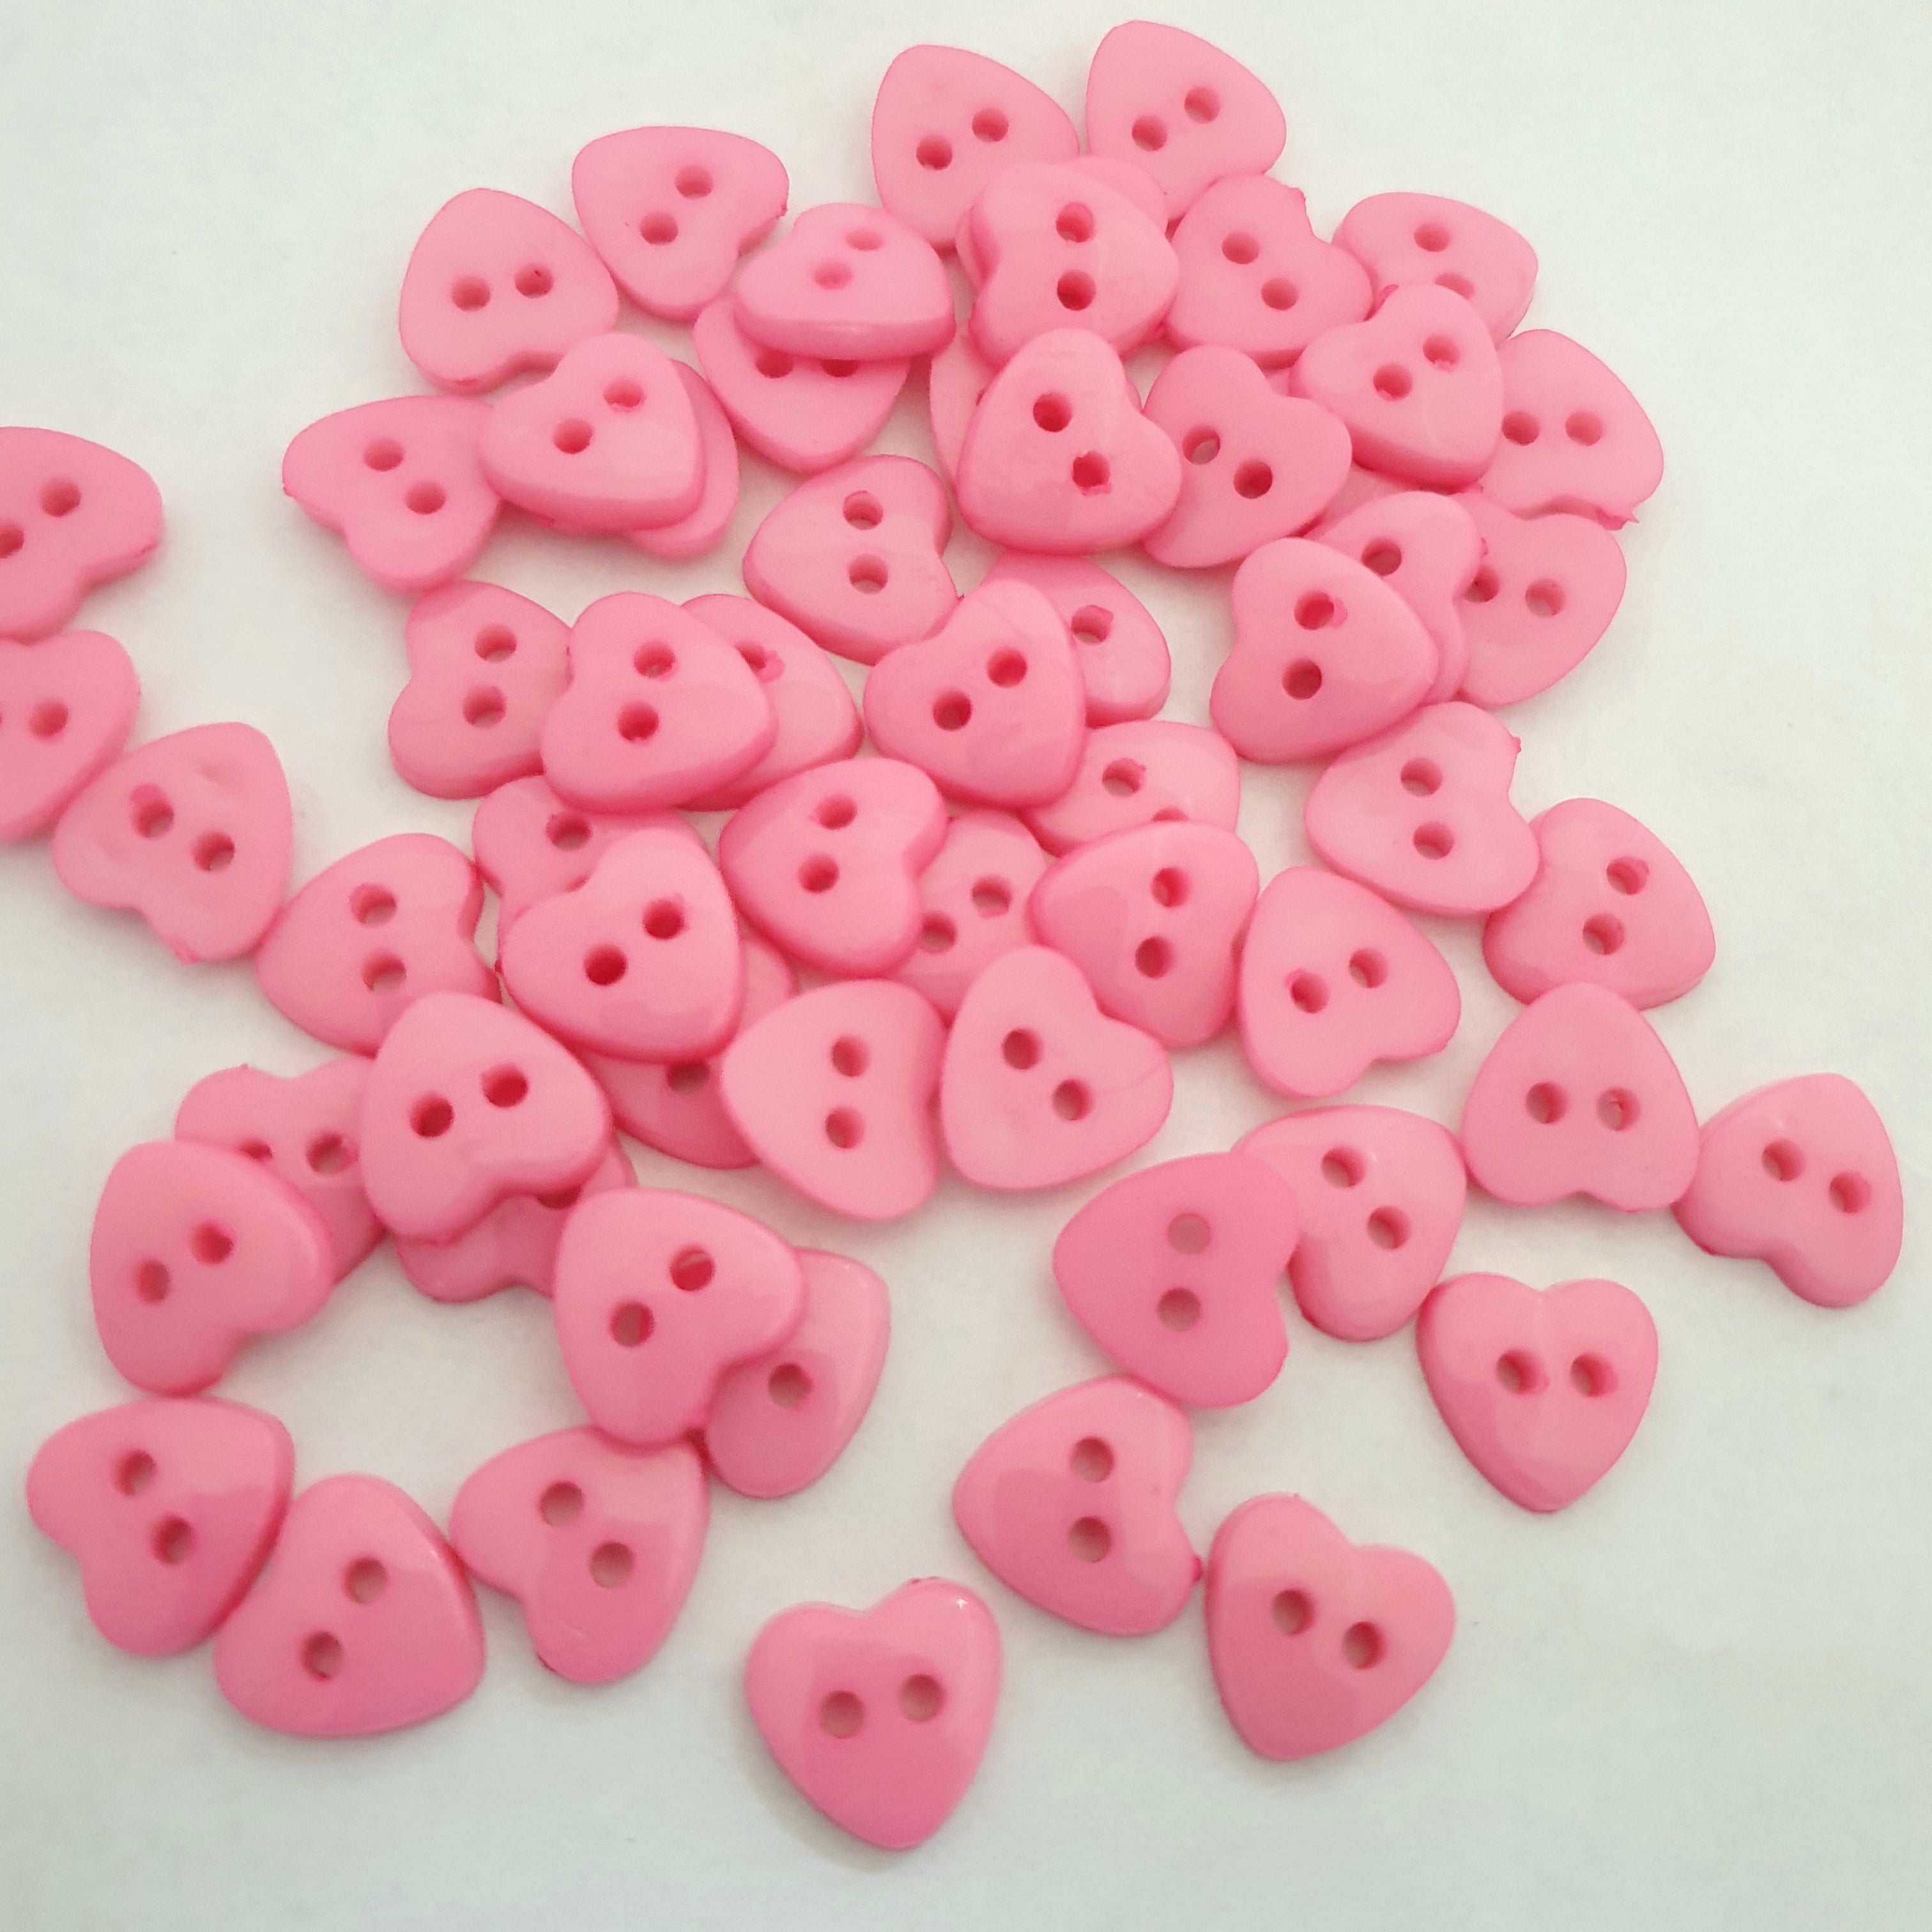 MajorCrafts 60pcs 13mm Bright Pink Heart Shaped 2 Holes Resin Sewing Buttons